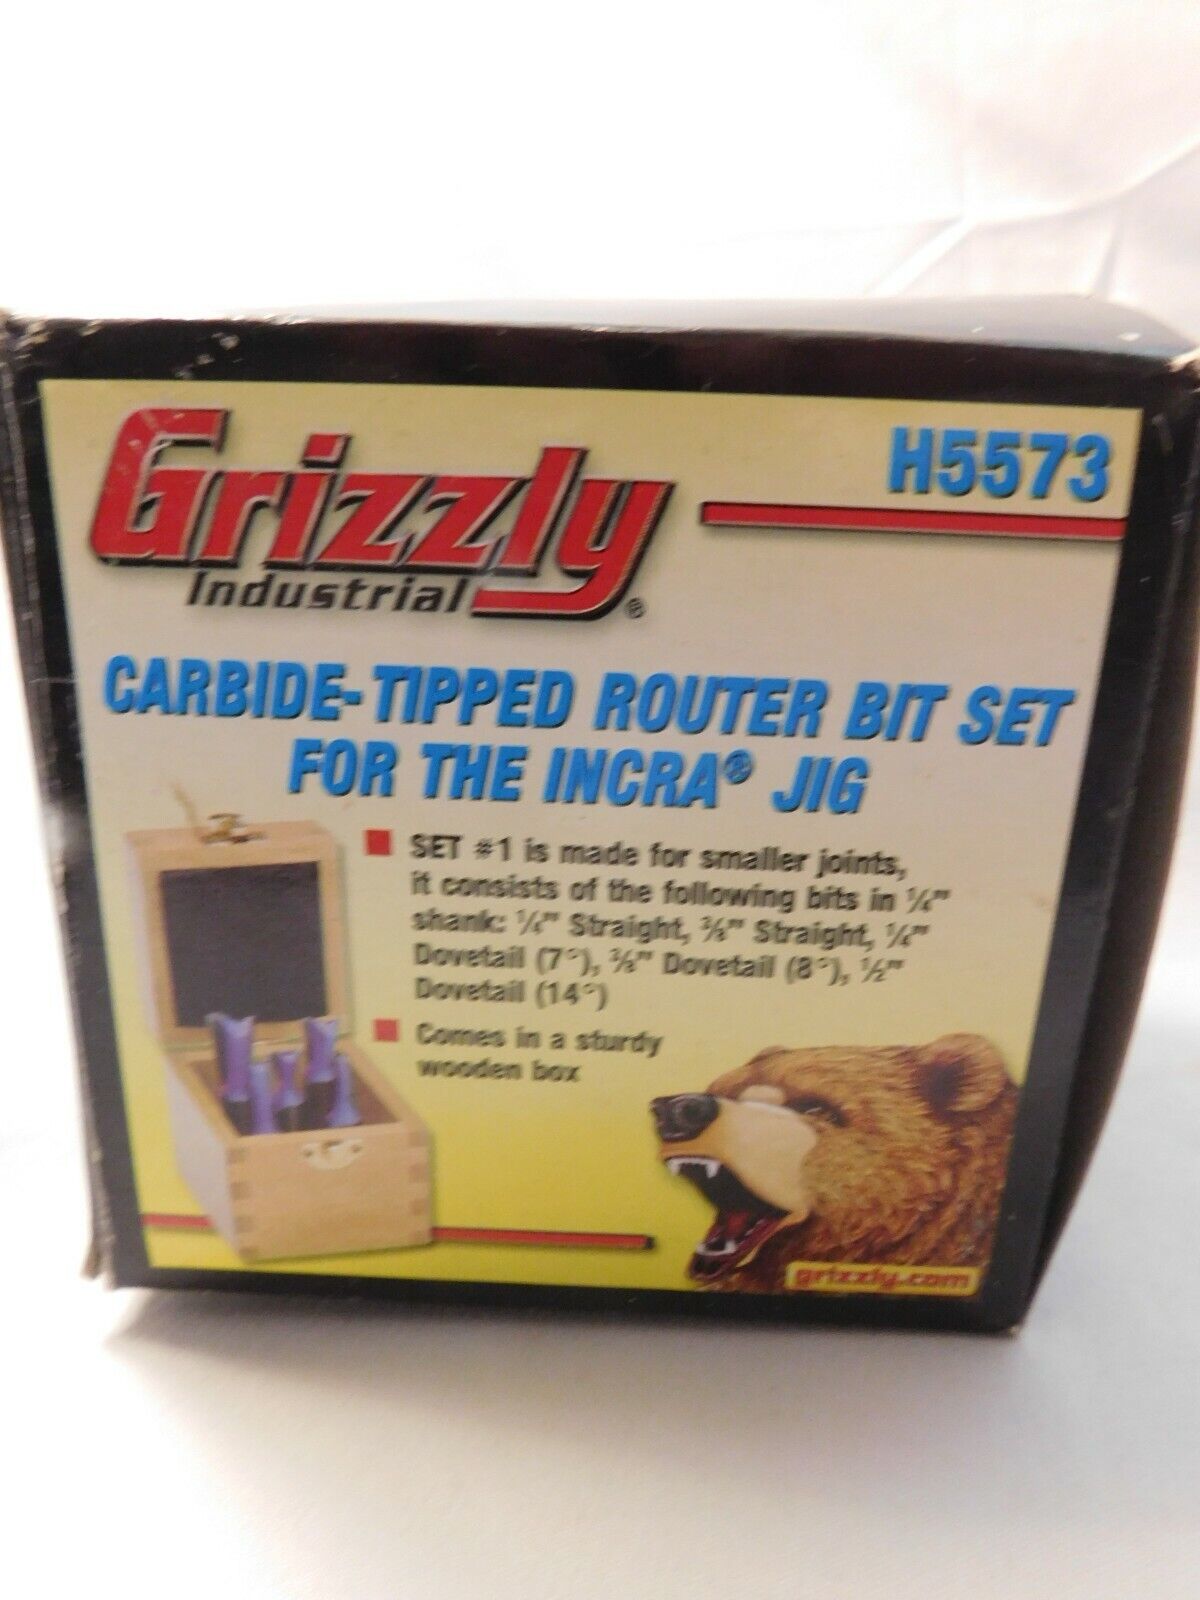 Grizzly Industrial H5573 Router Bit Set 1/4" Shank